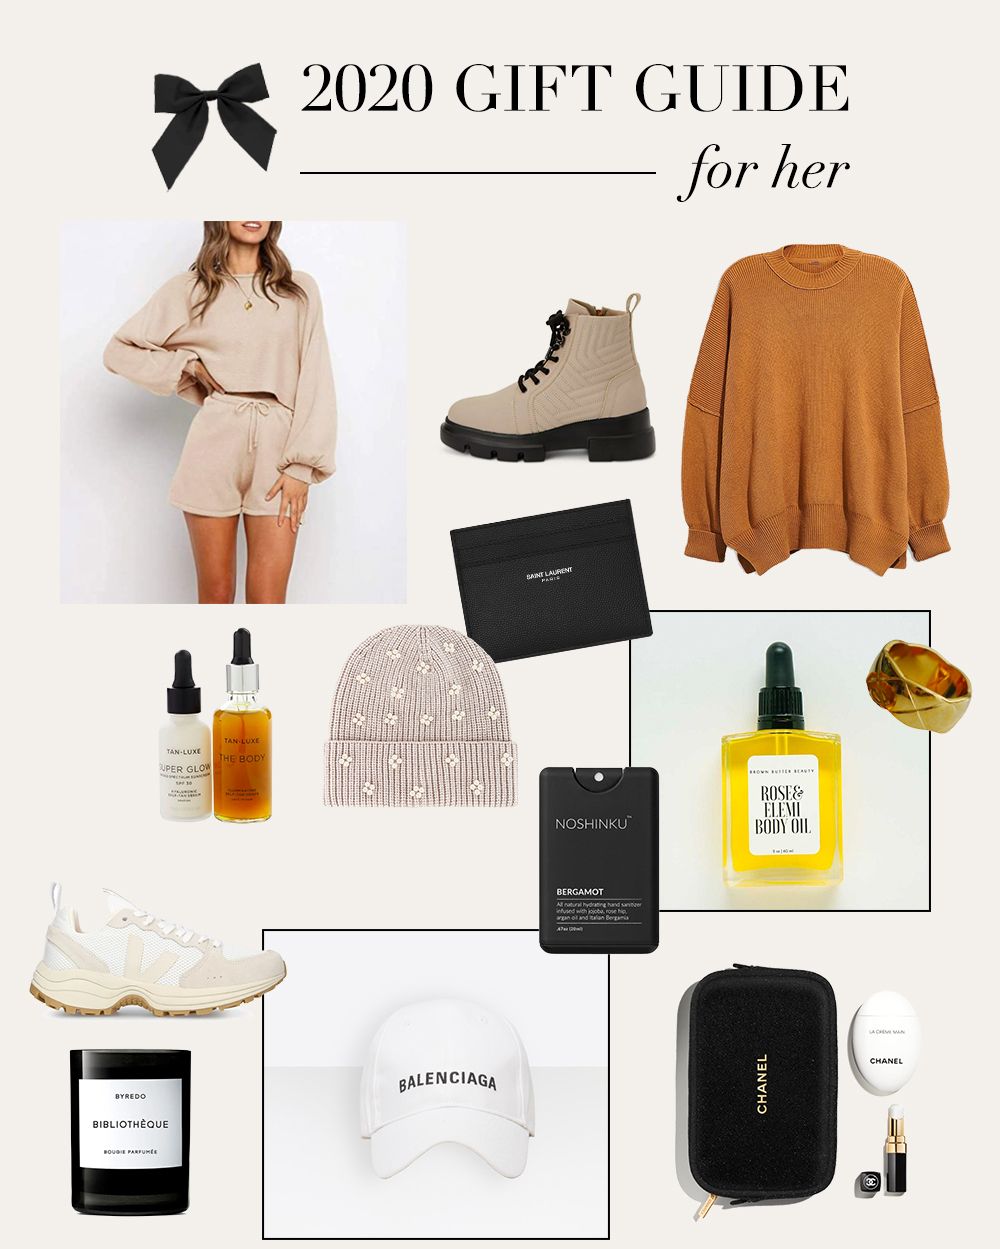 2020 Gift Guide: FOR HER